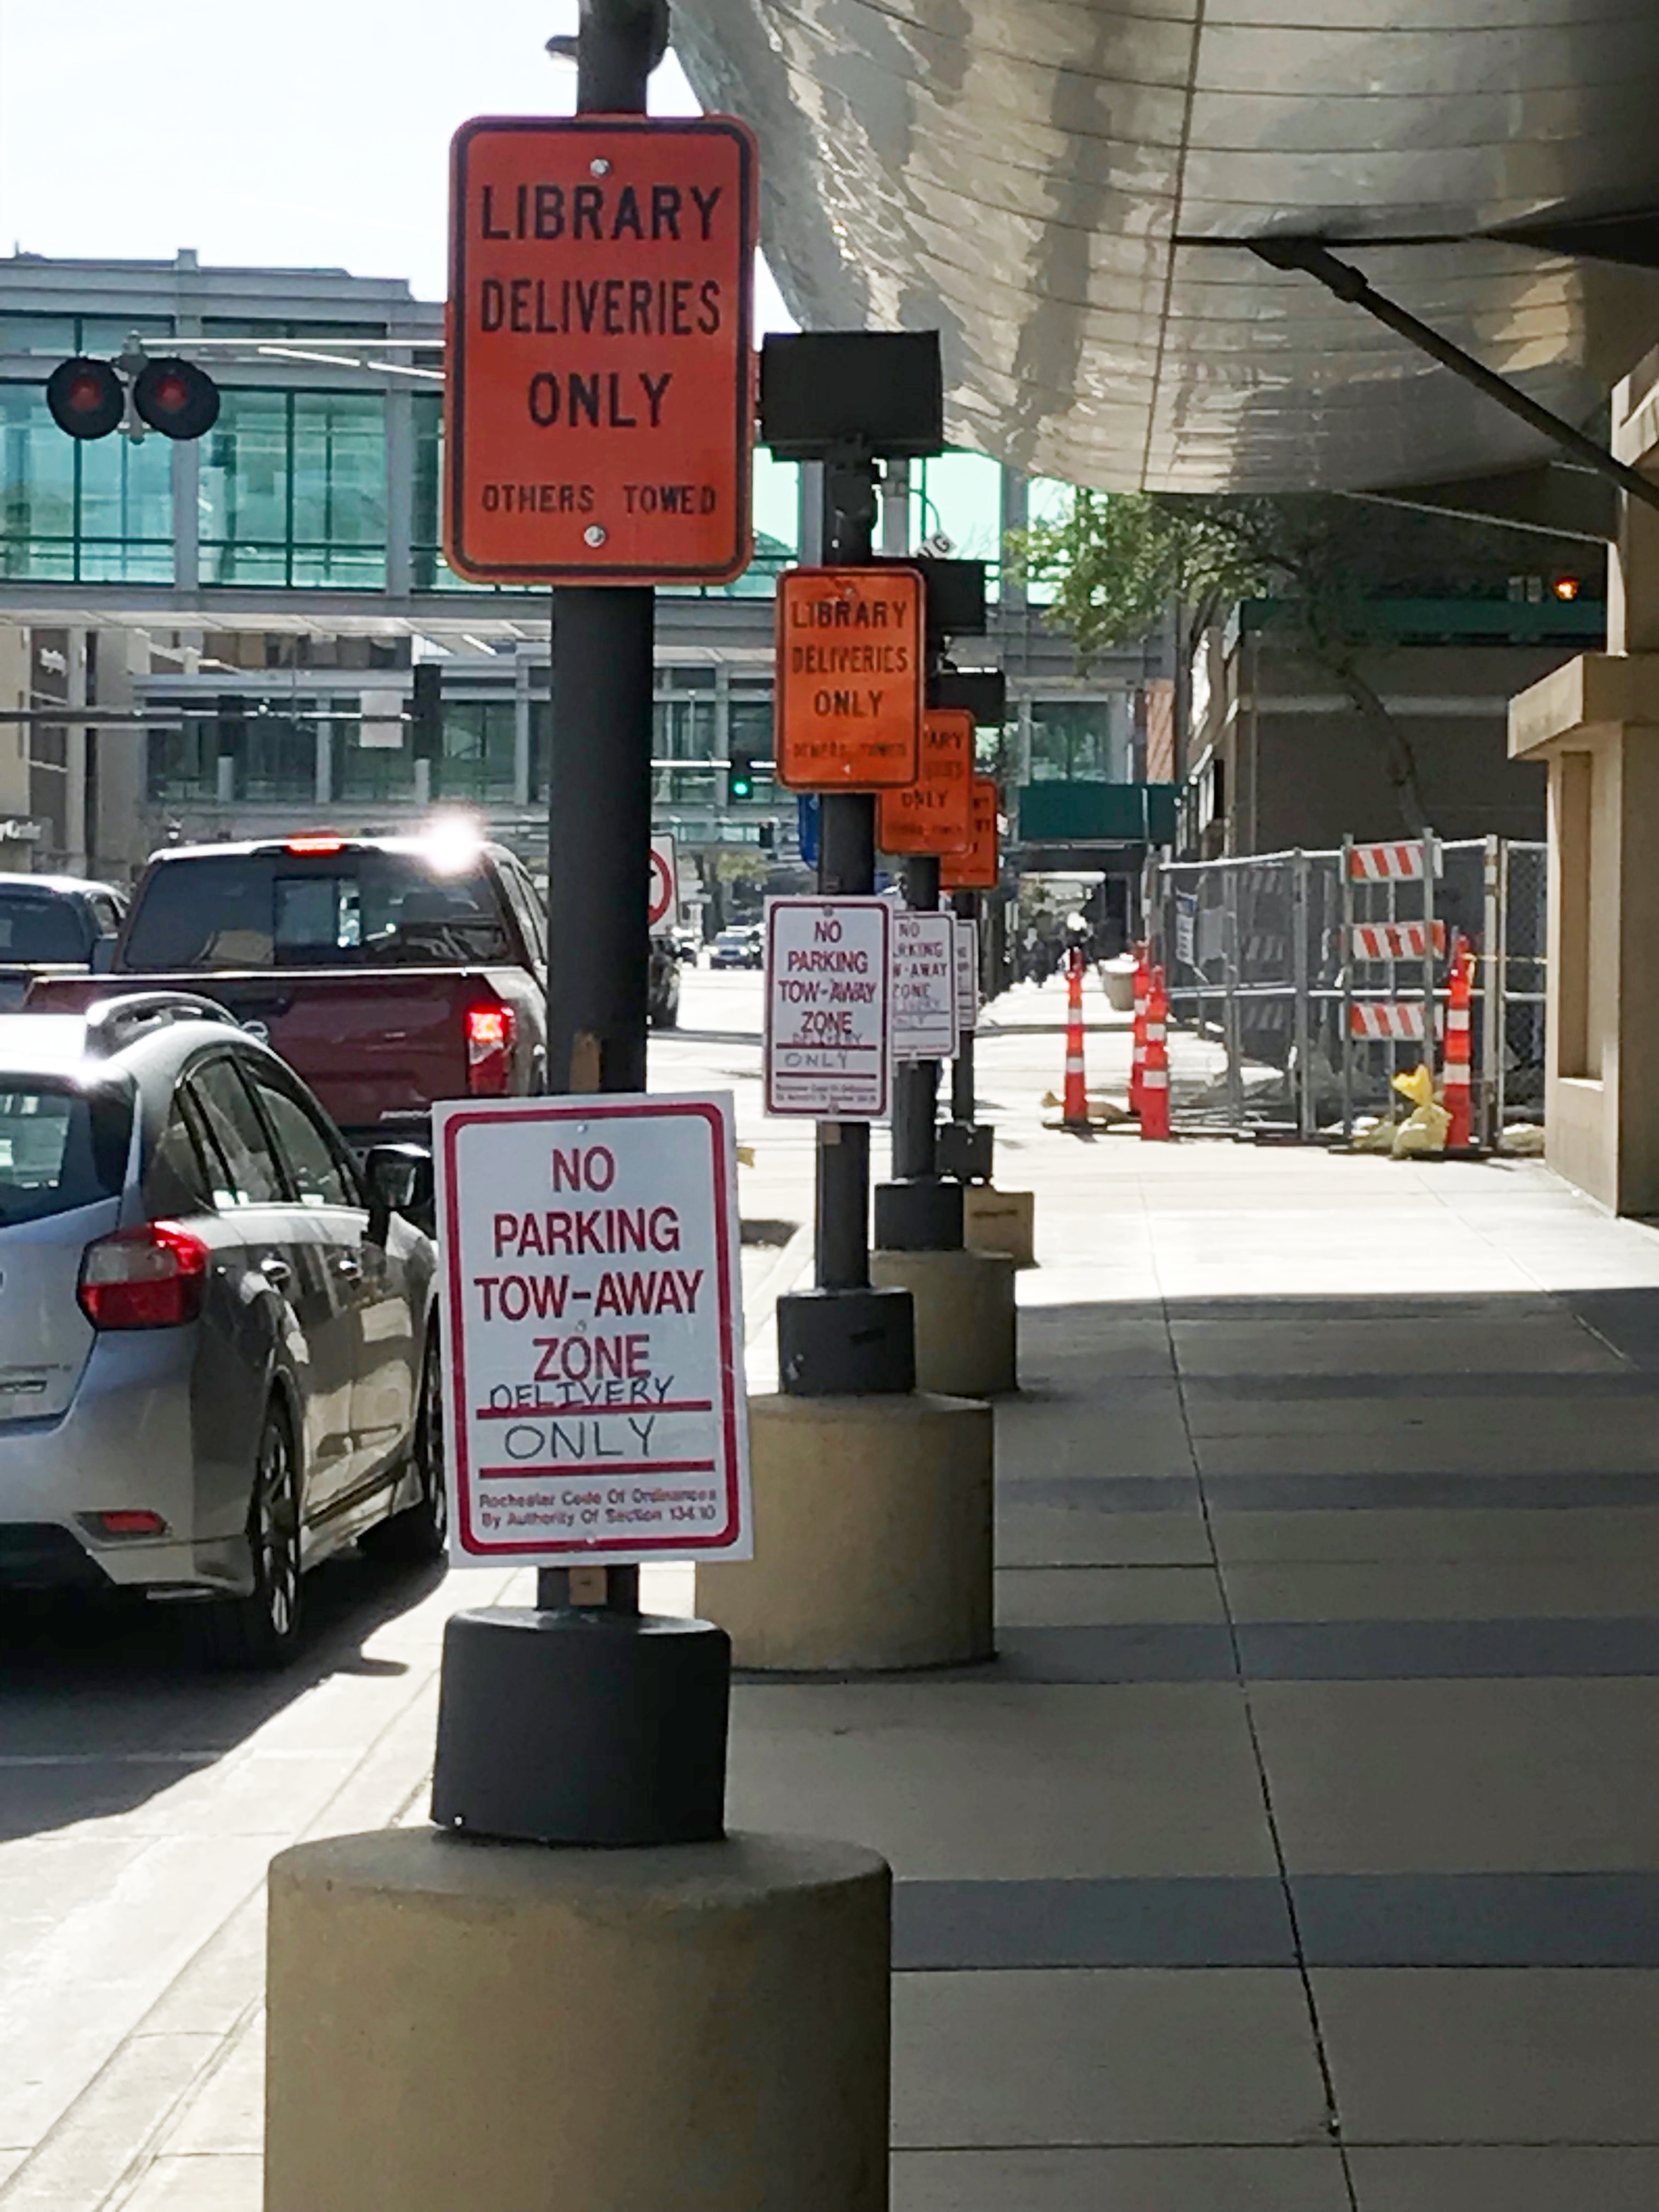 Hardin new library delivery signs tow away zone 5-7-2019